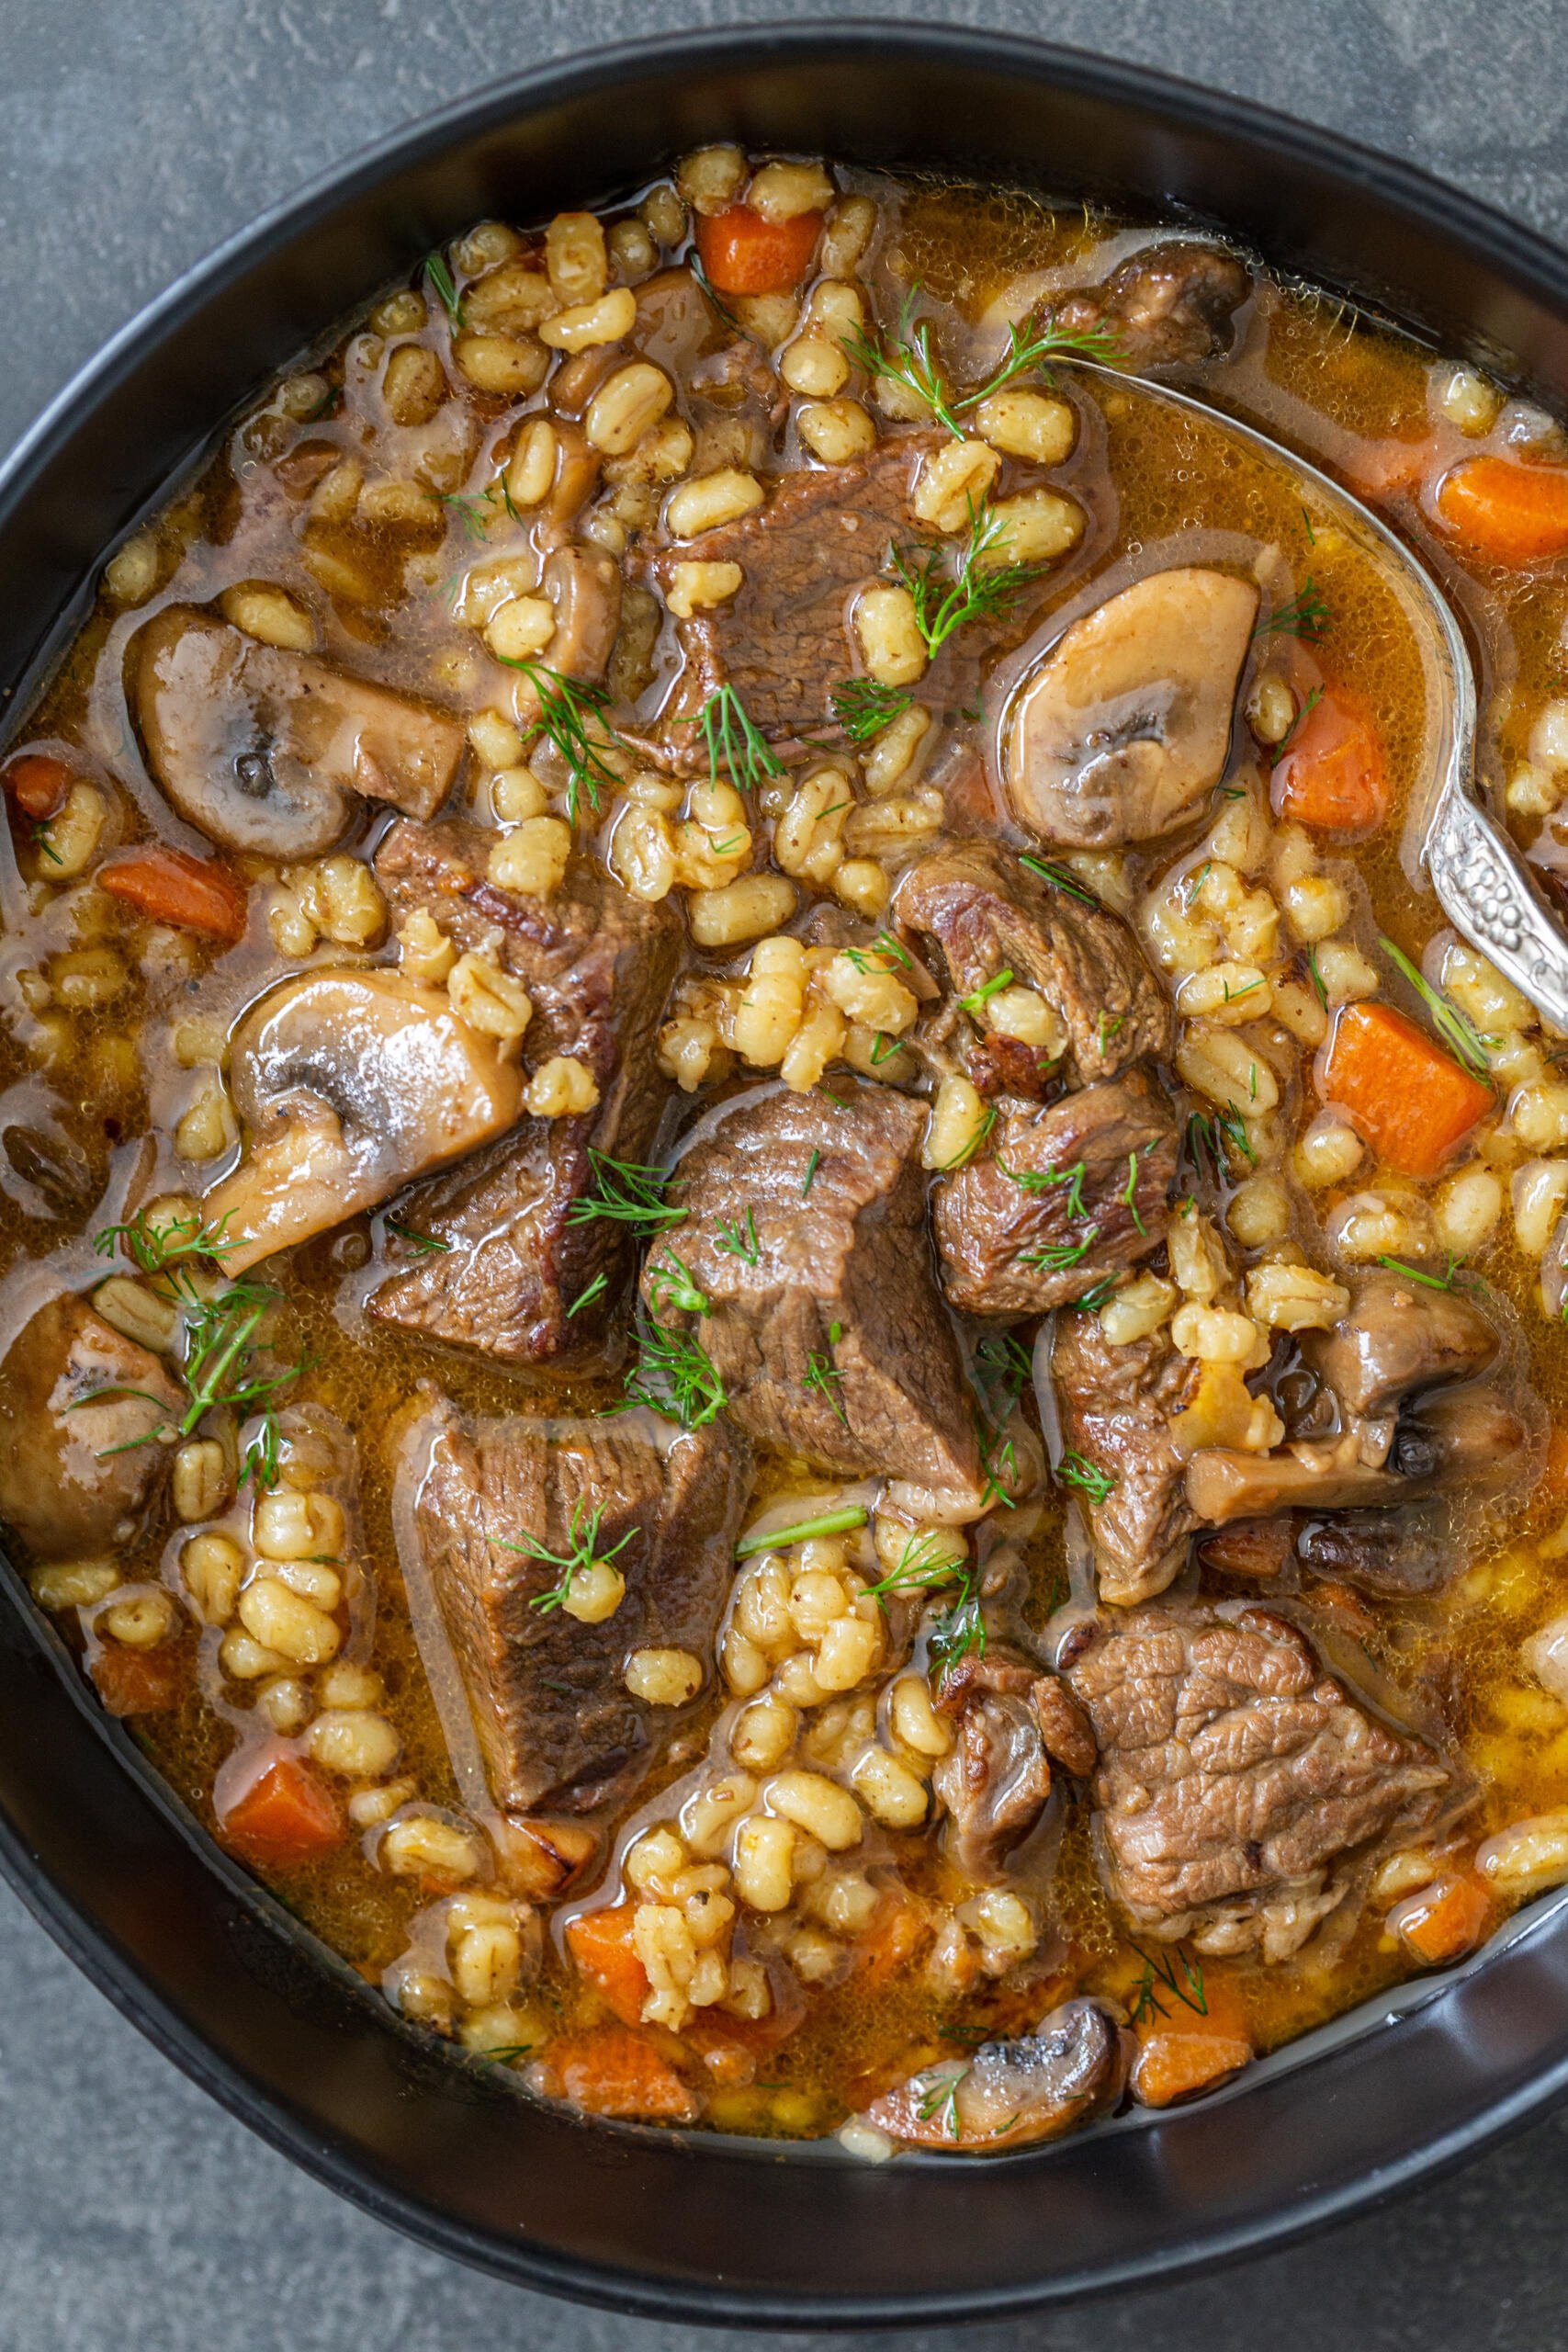 Beef Barley Soup With Lemon Recipe - NYT Cooking